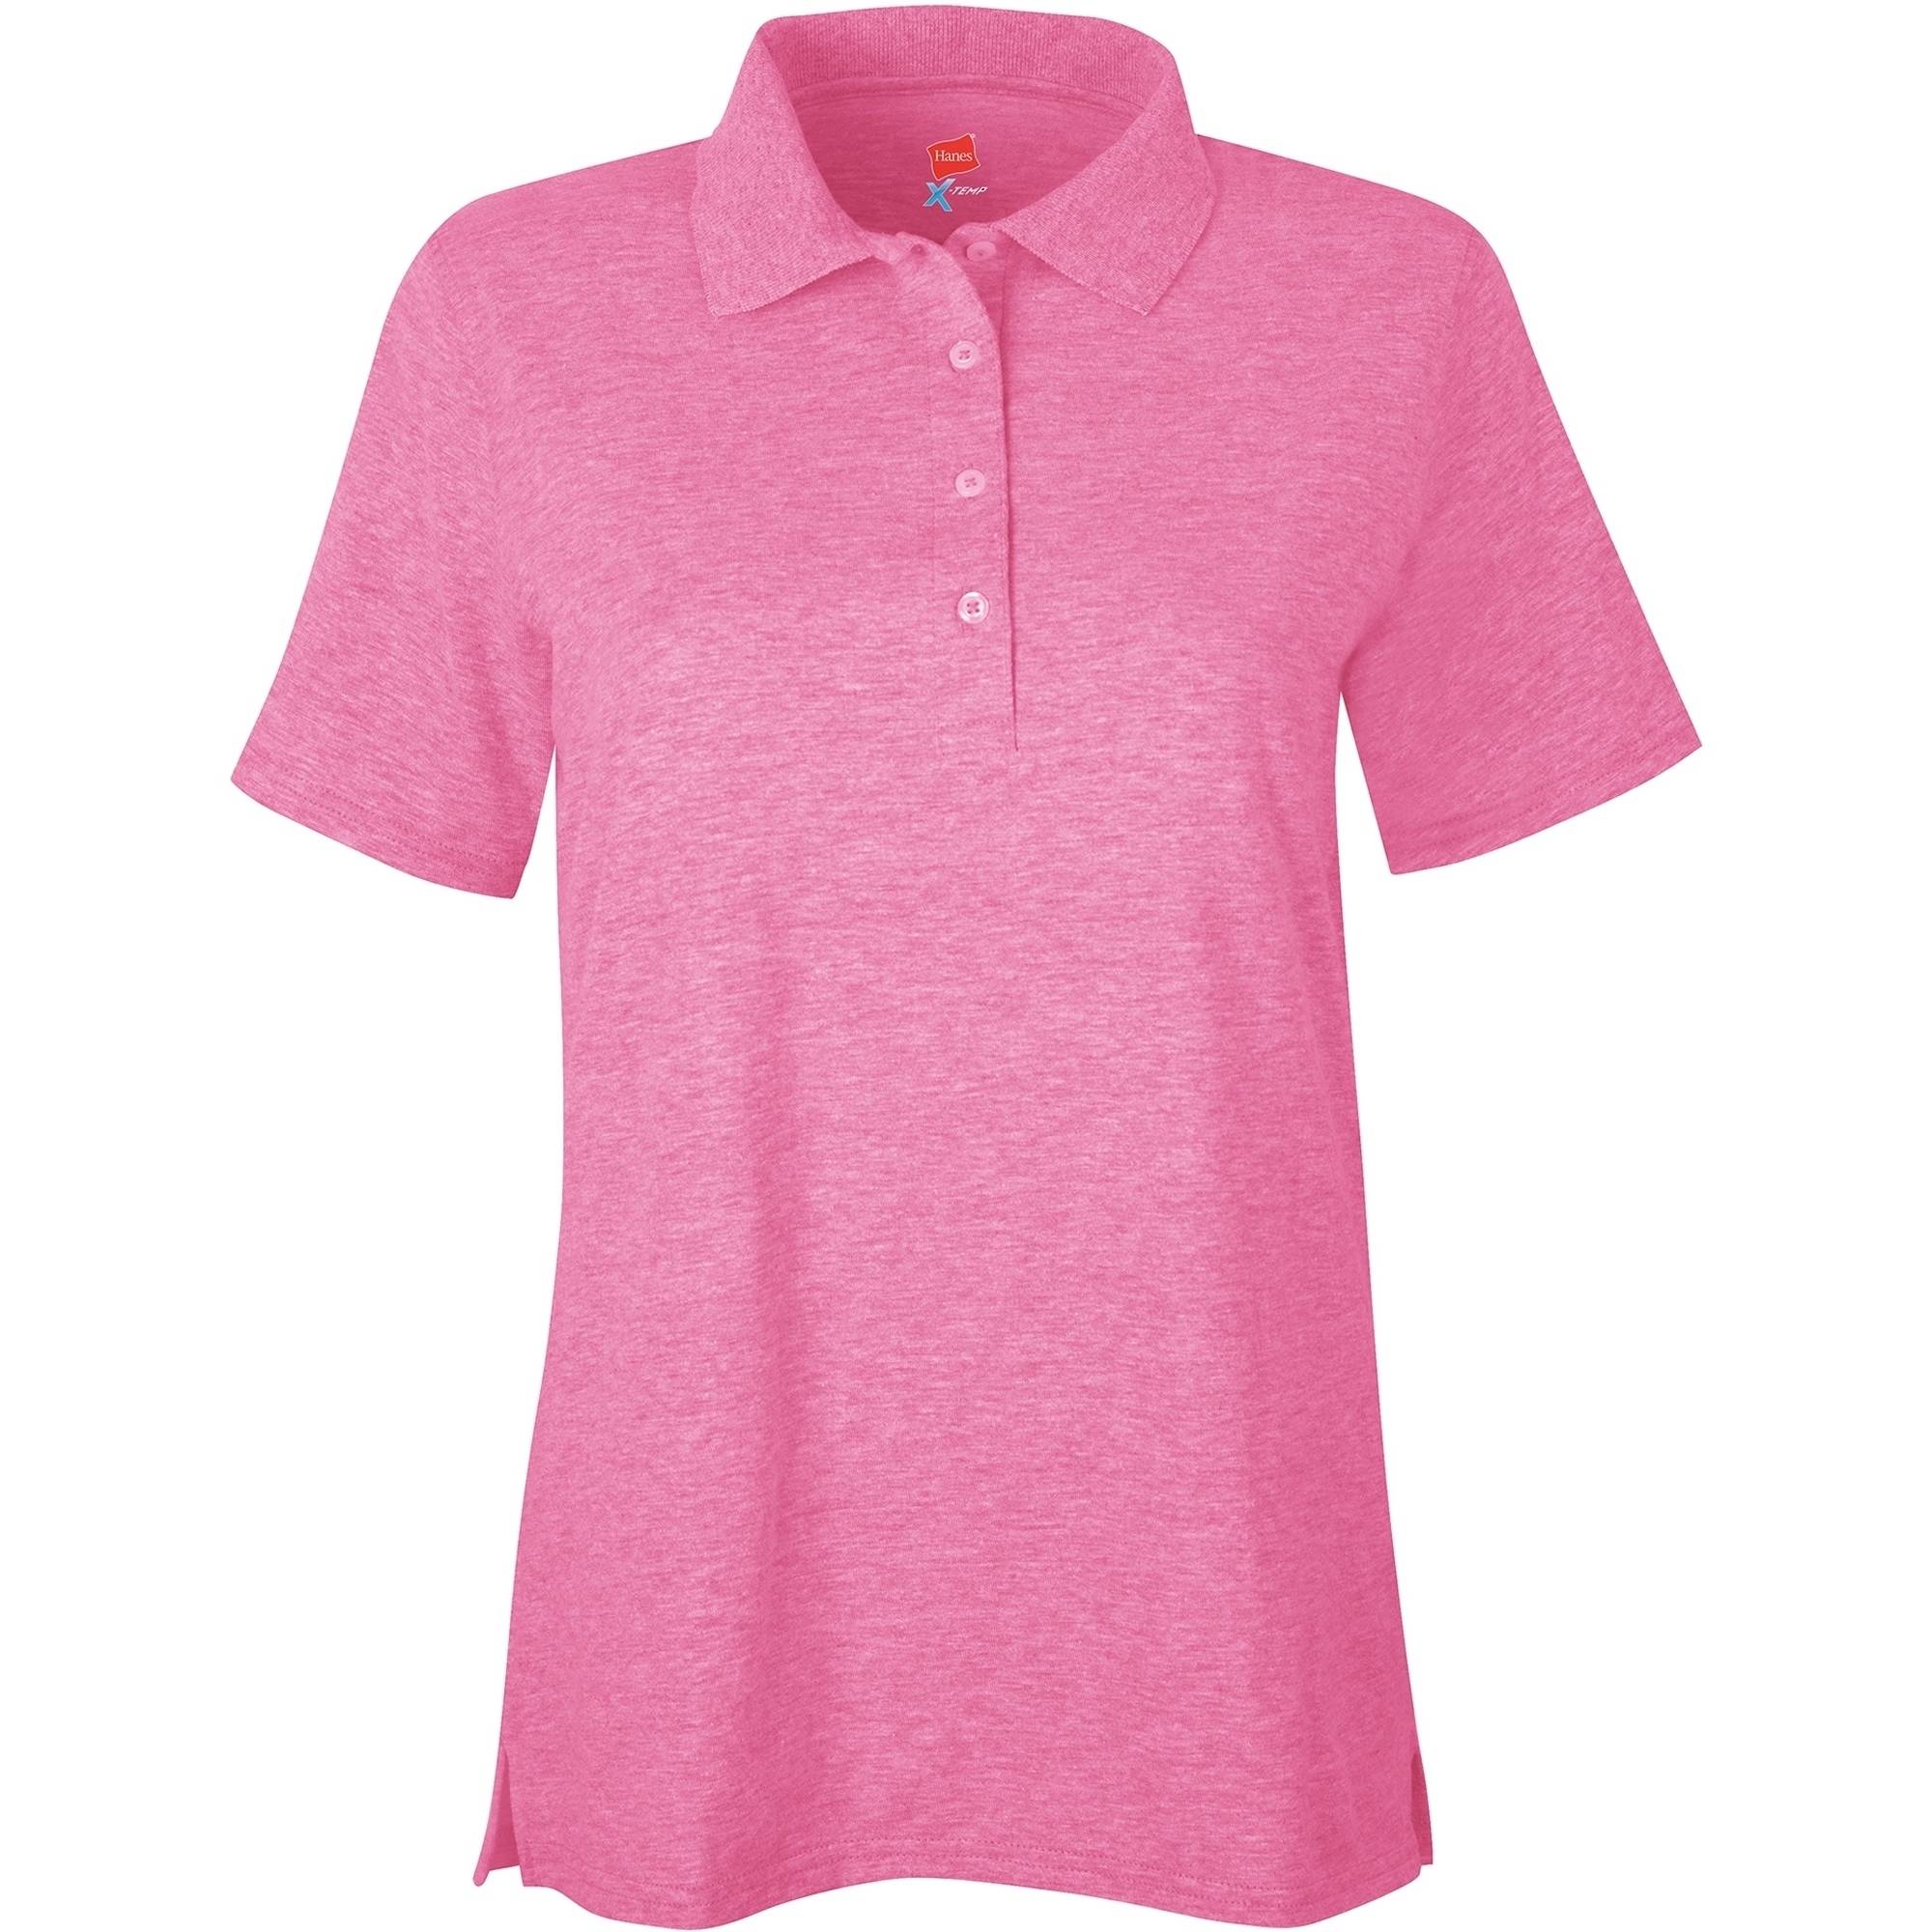 Womens X-temp Polo Sportshirt With Wicking Properties - image 5 of 5